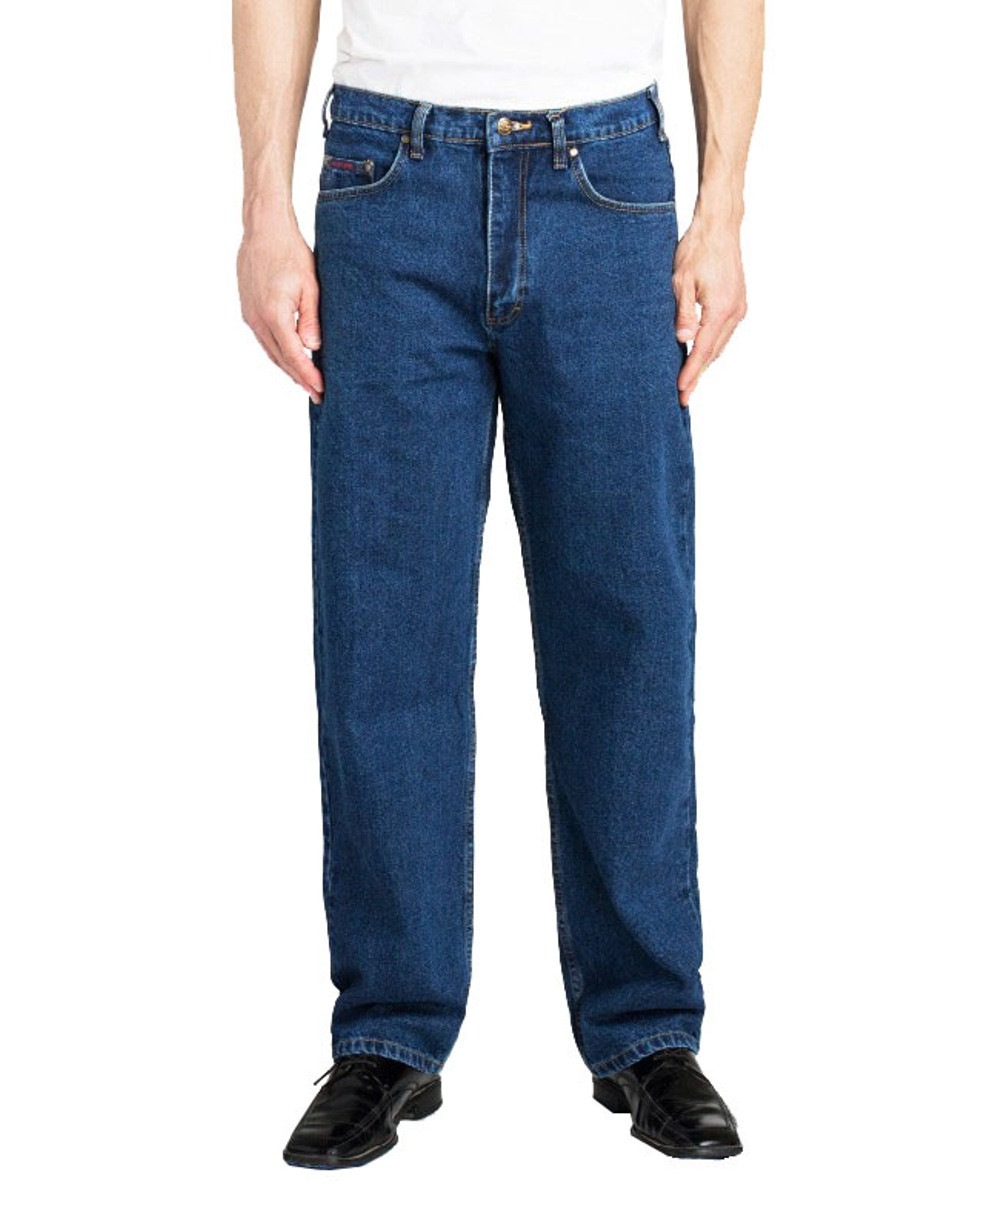 Grand River Classic Fit 100% Cotton Jeans - Dick Anthony Ltd.